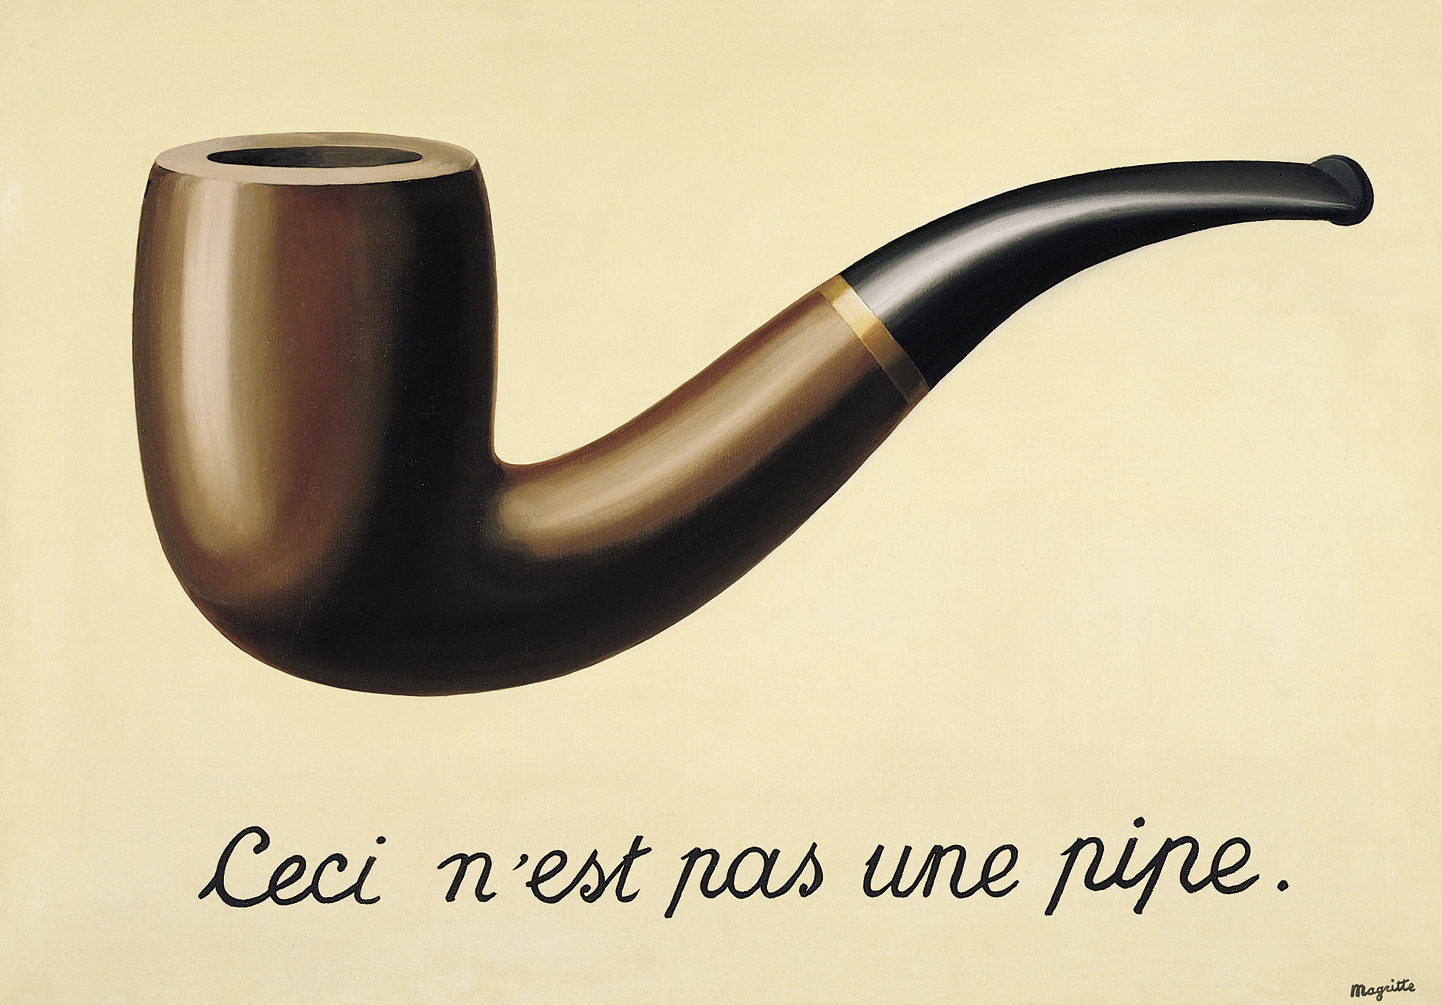 [Magritte’s pipe]